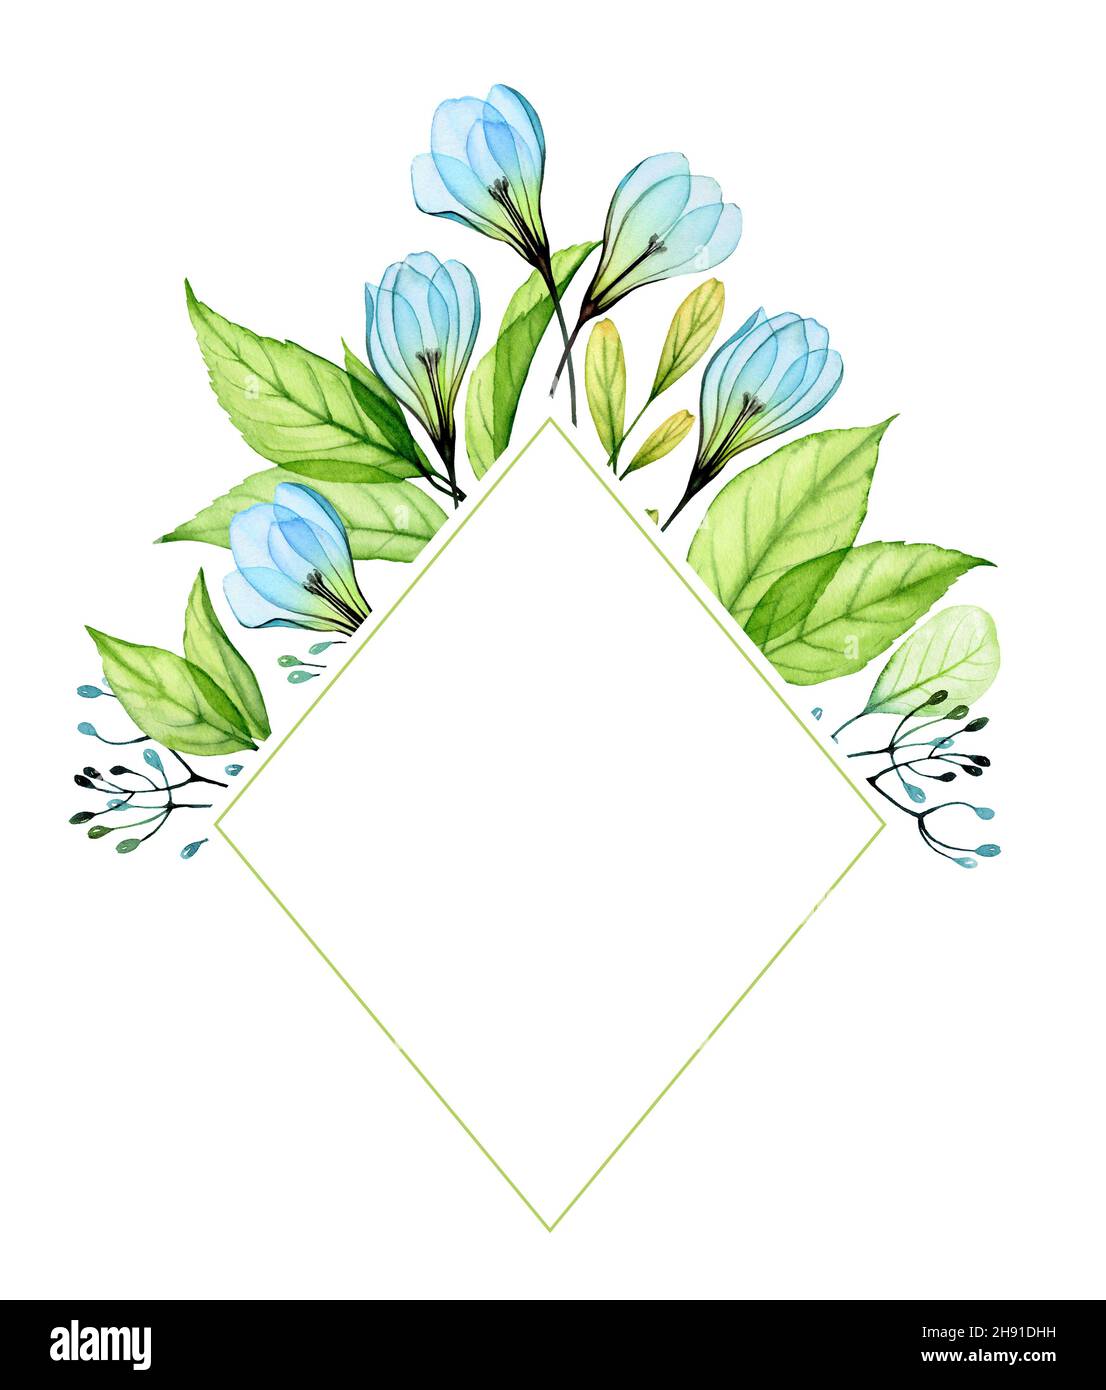 Watercolor rhomb frame with blue flowers. Card template with snowdrops and fresh green leaves. Place for text. Botanical floral illustration for Stock Photo